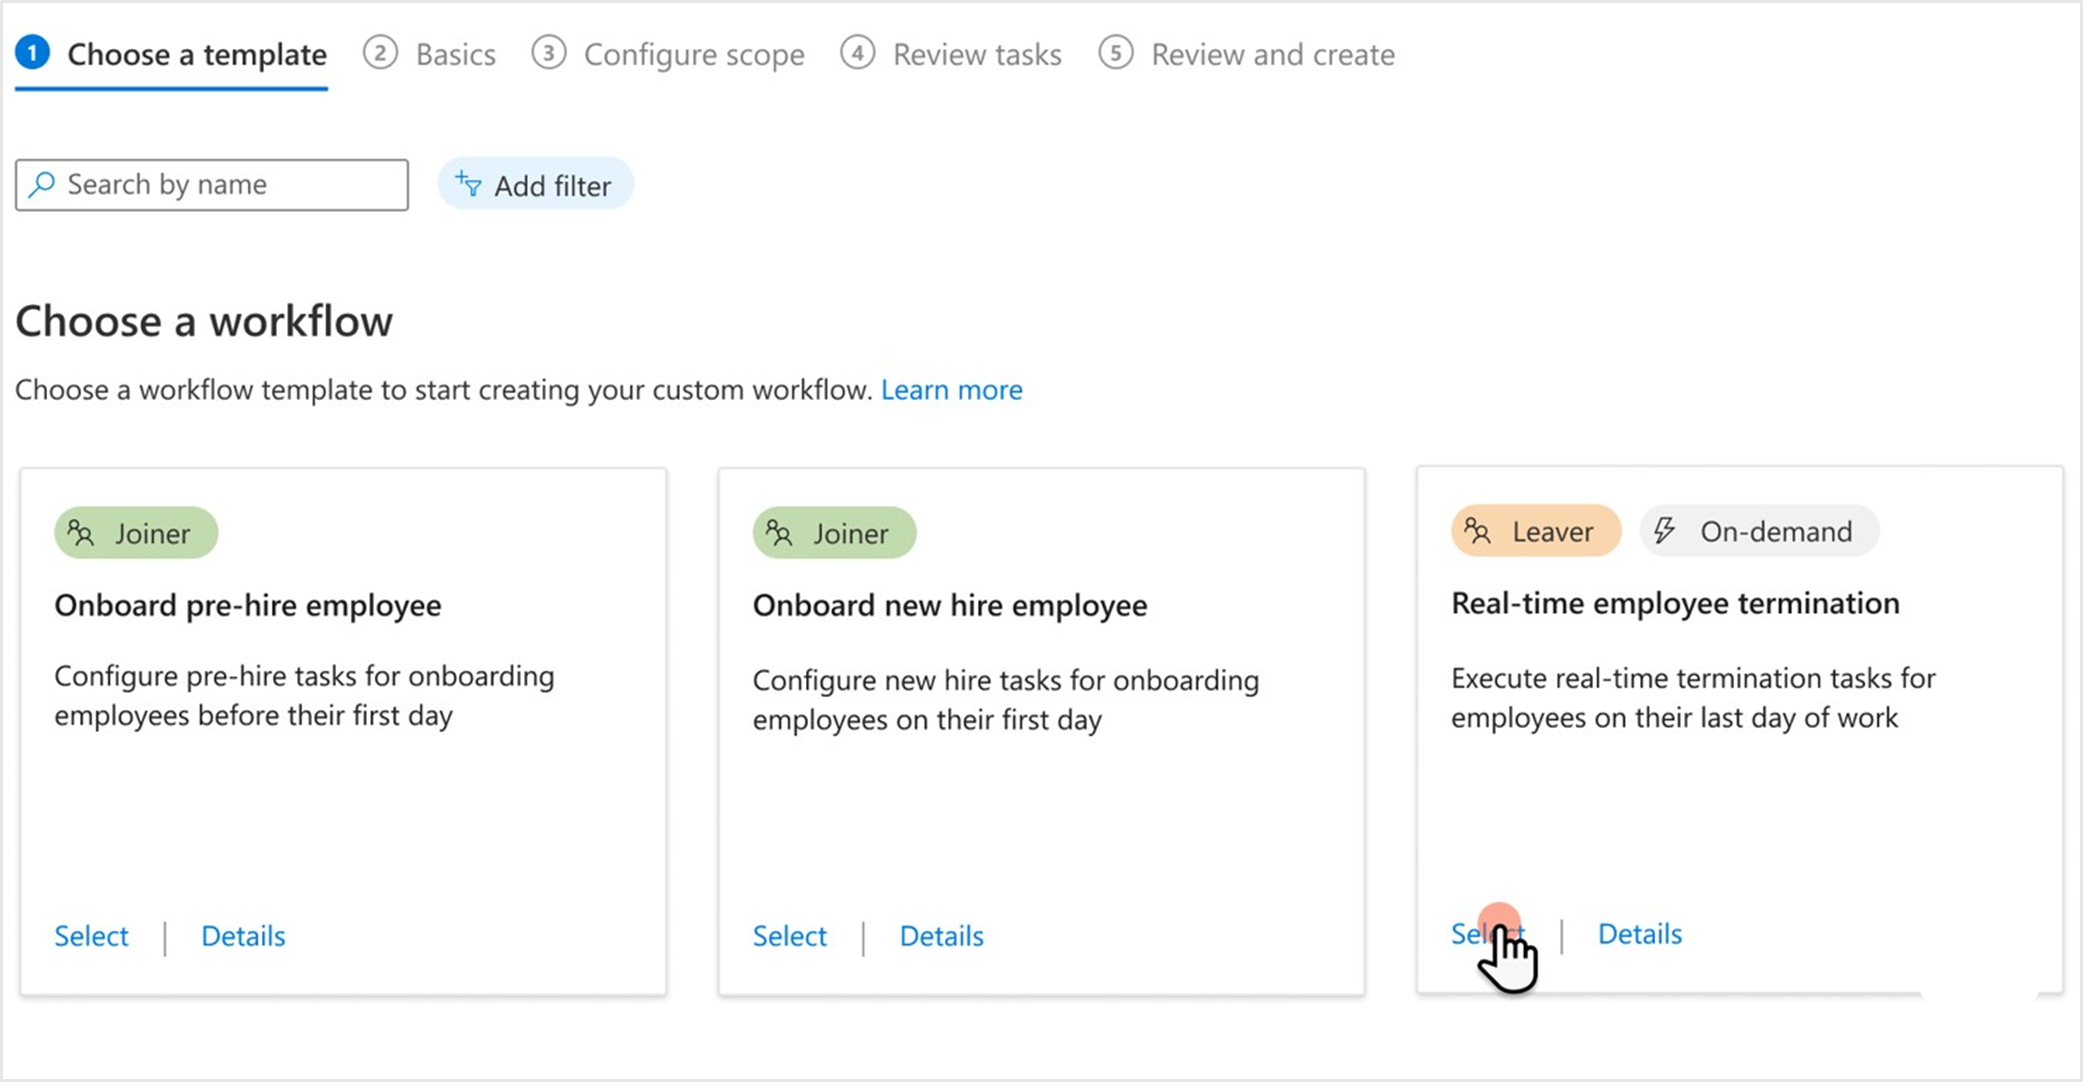 Screenshot of selecting a workflow template for real-time employee termination.